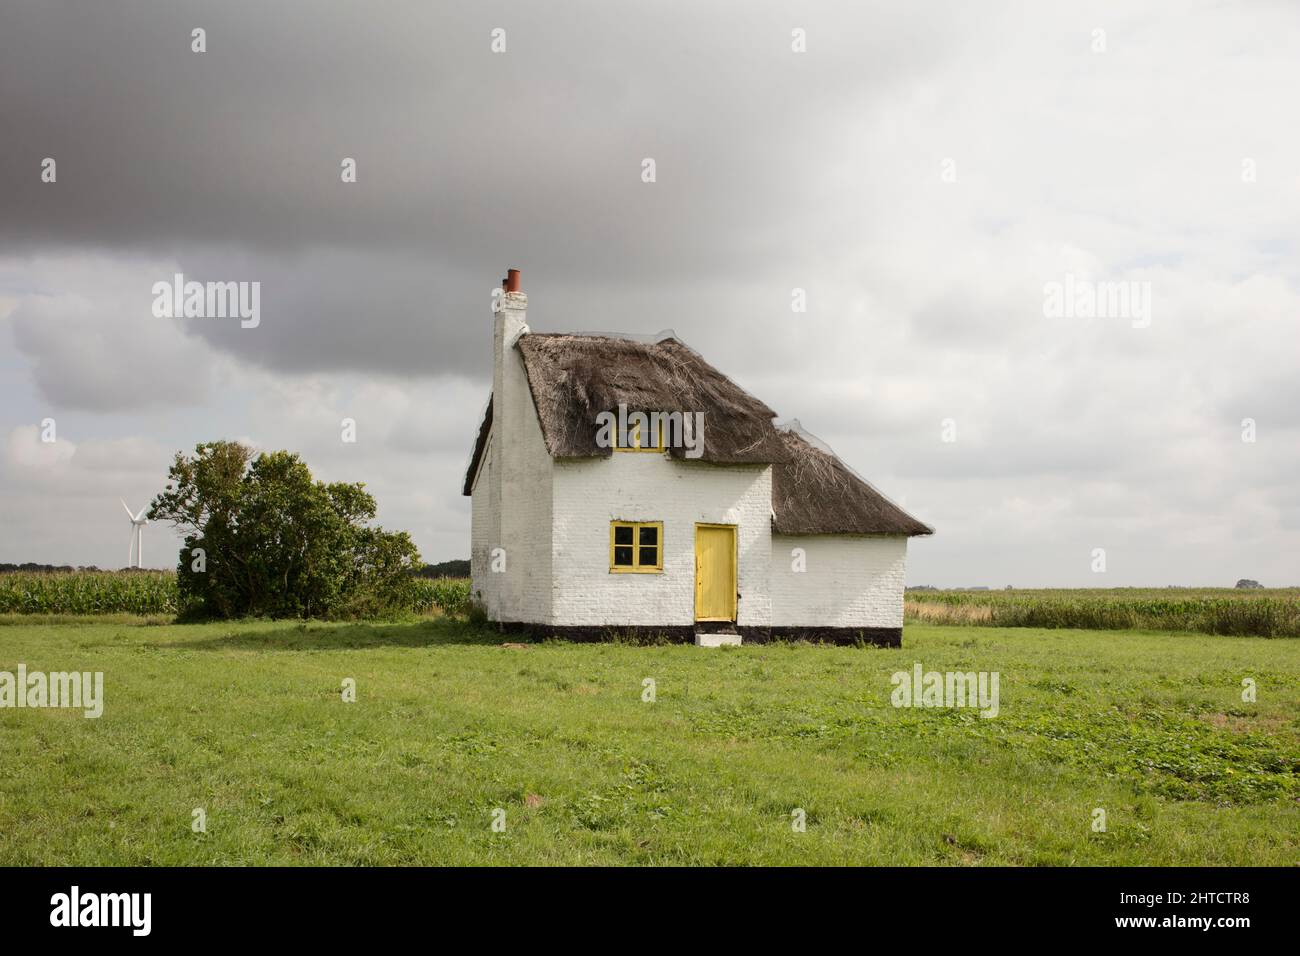 Canary Cottage, Knarr Farm, Thorney Toll, Thorney, City of Peterborough, Cambridgeshire, 2019. General view of Canary Cottage from the south-west. Stock Photo